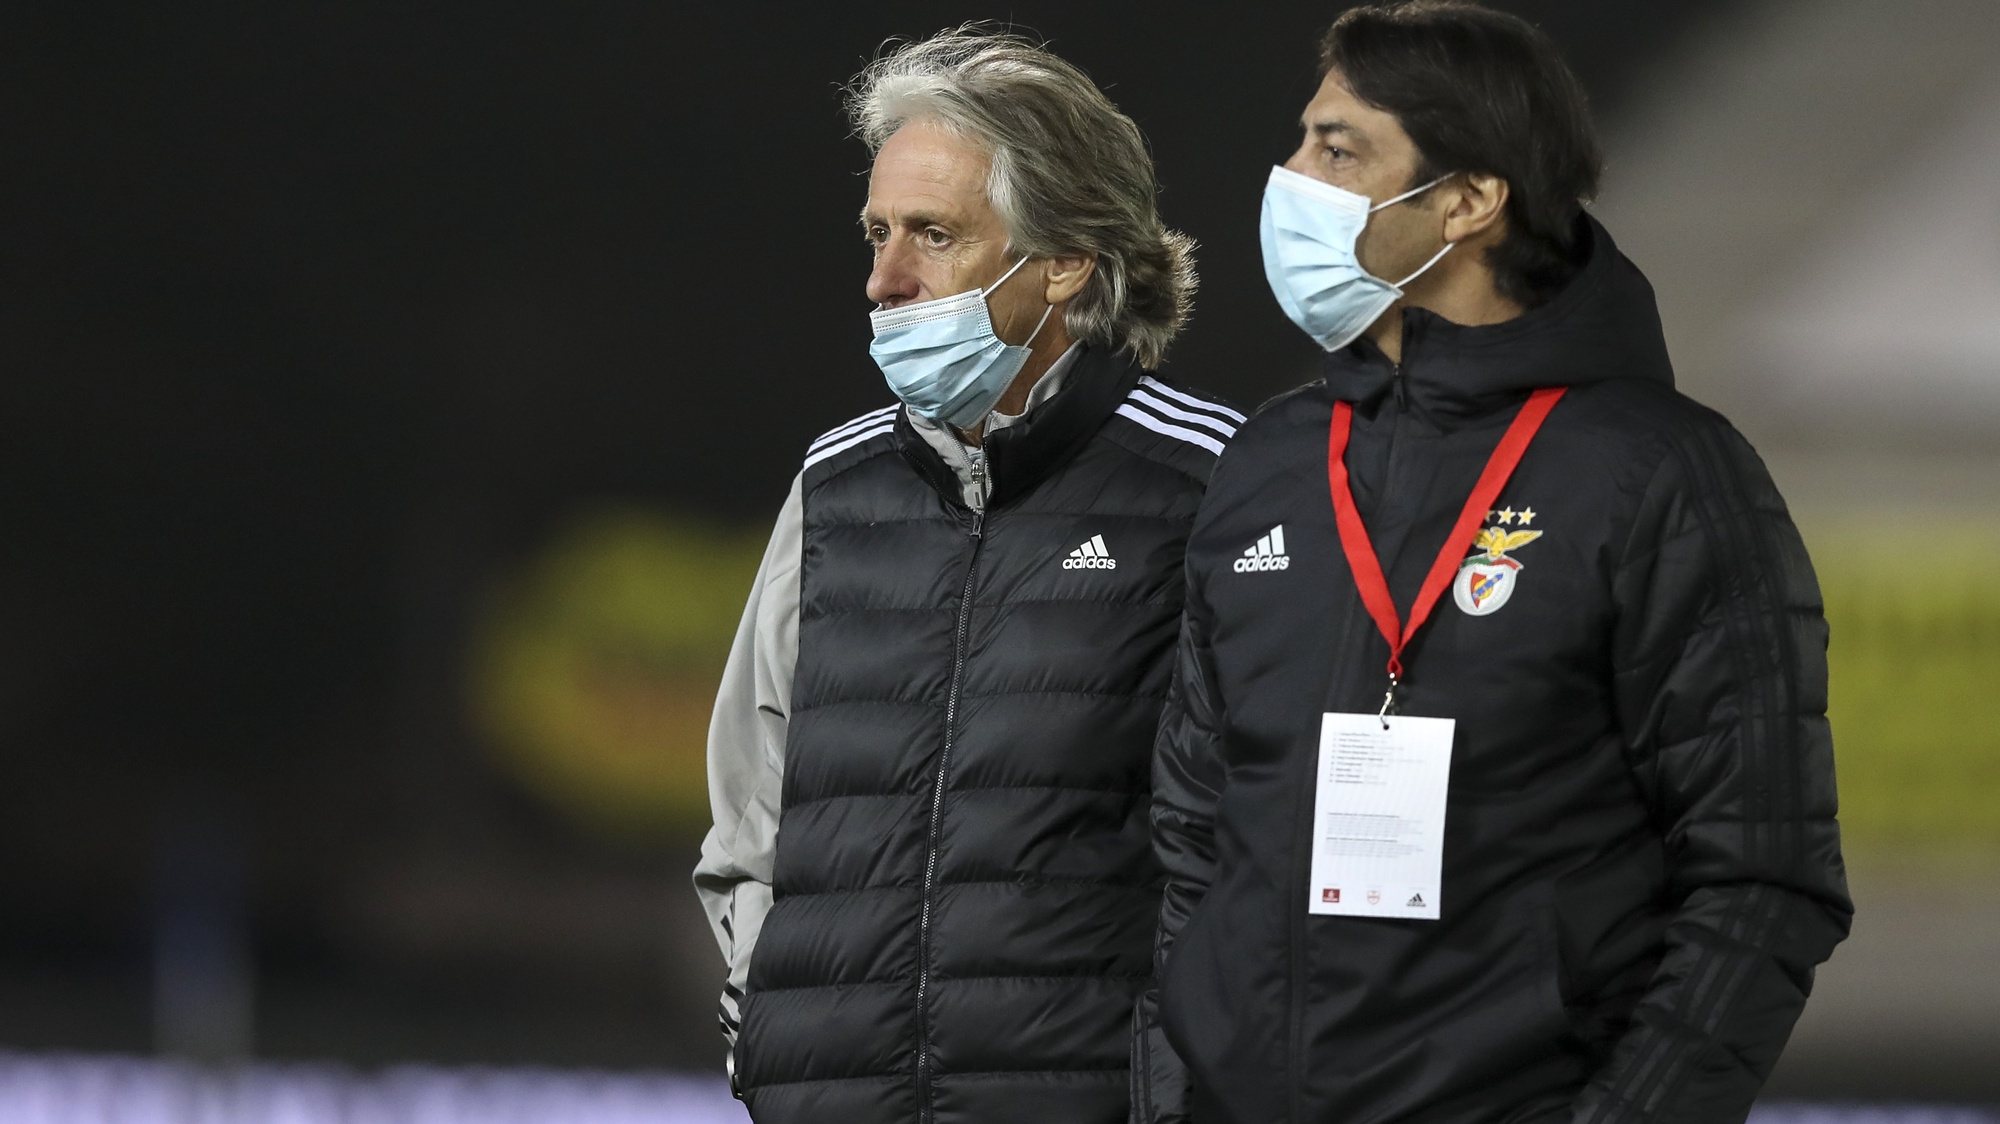 Benfica&#039;s head-coach Jorge Jesus (L) during their Portuguese Cup soccer match against Paredes, held at  Cidade Desportiva de Paredes stadium, in Paredes, north of Portugal, 21st November 2020. JOSE COELHO/LUSA